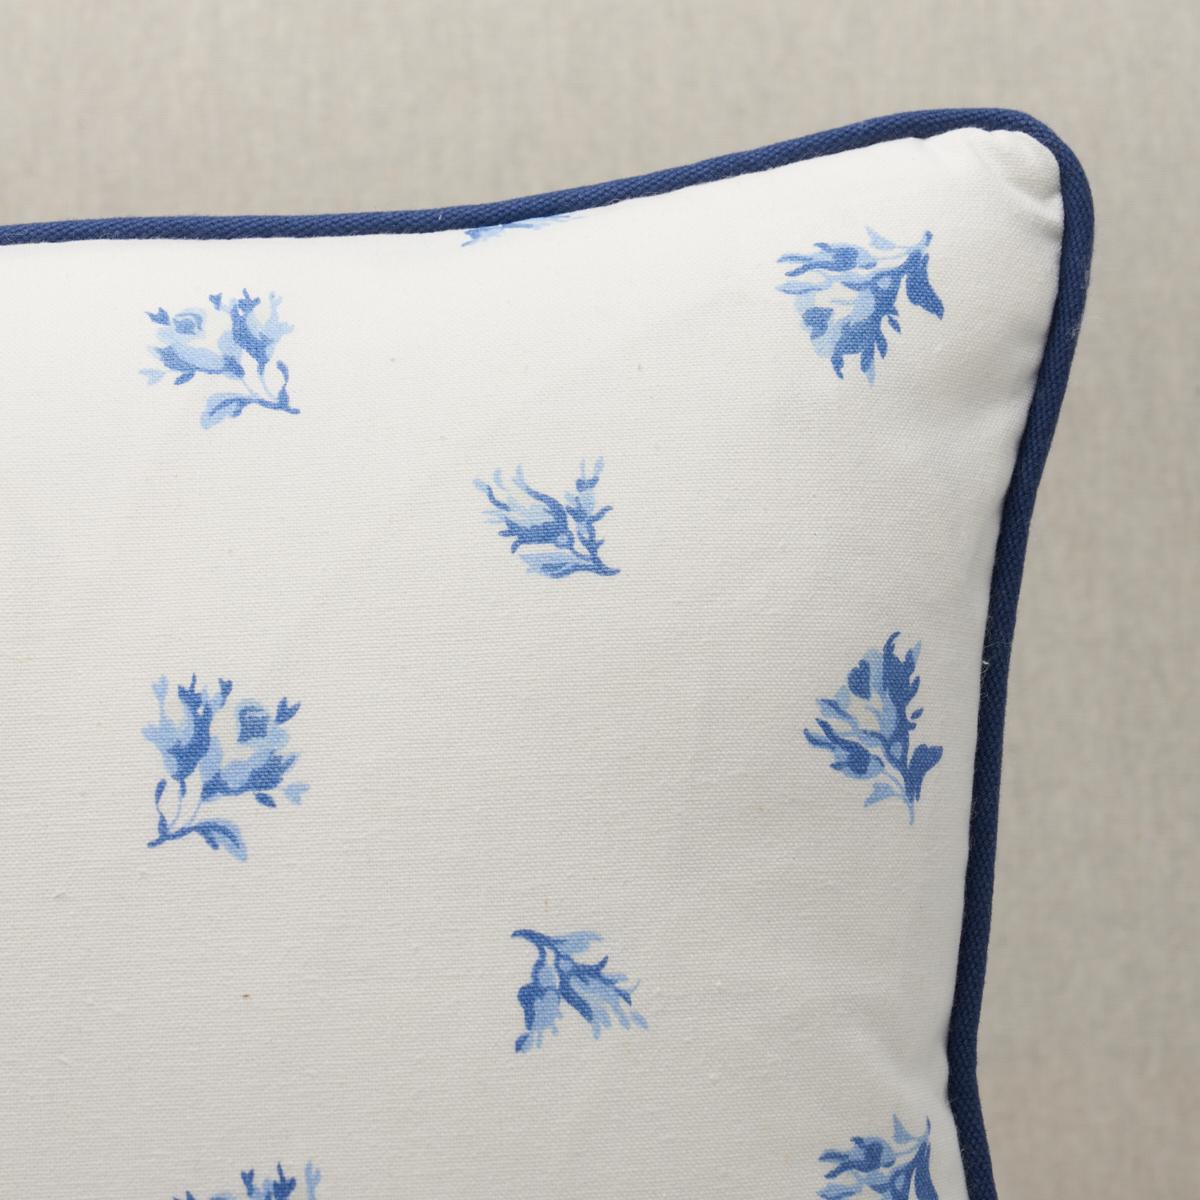 This pillow features Margie Floral. A classic delicate rosebud pattern inspired by a vintage design, Margie Floral in marigold is printed on a soft cotton-linen ground. Pillow is finished with a welt in Elliott Brushed Cotton. Welt contents: 100%